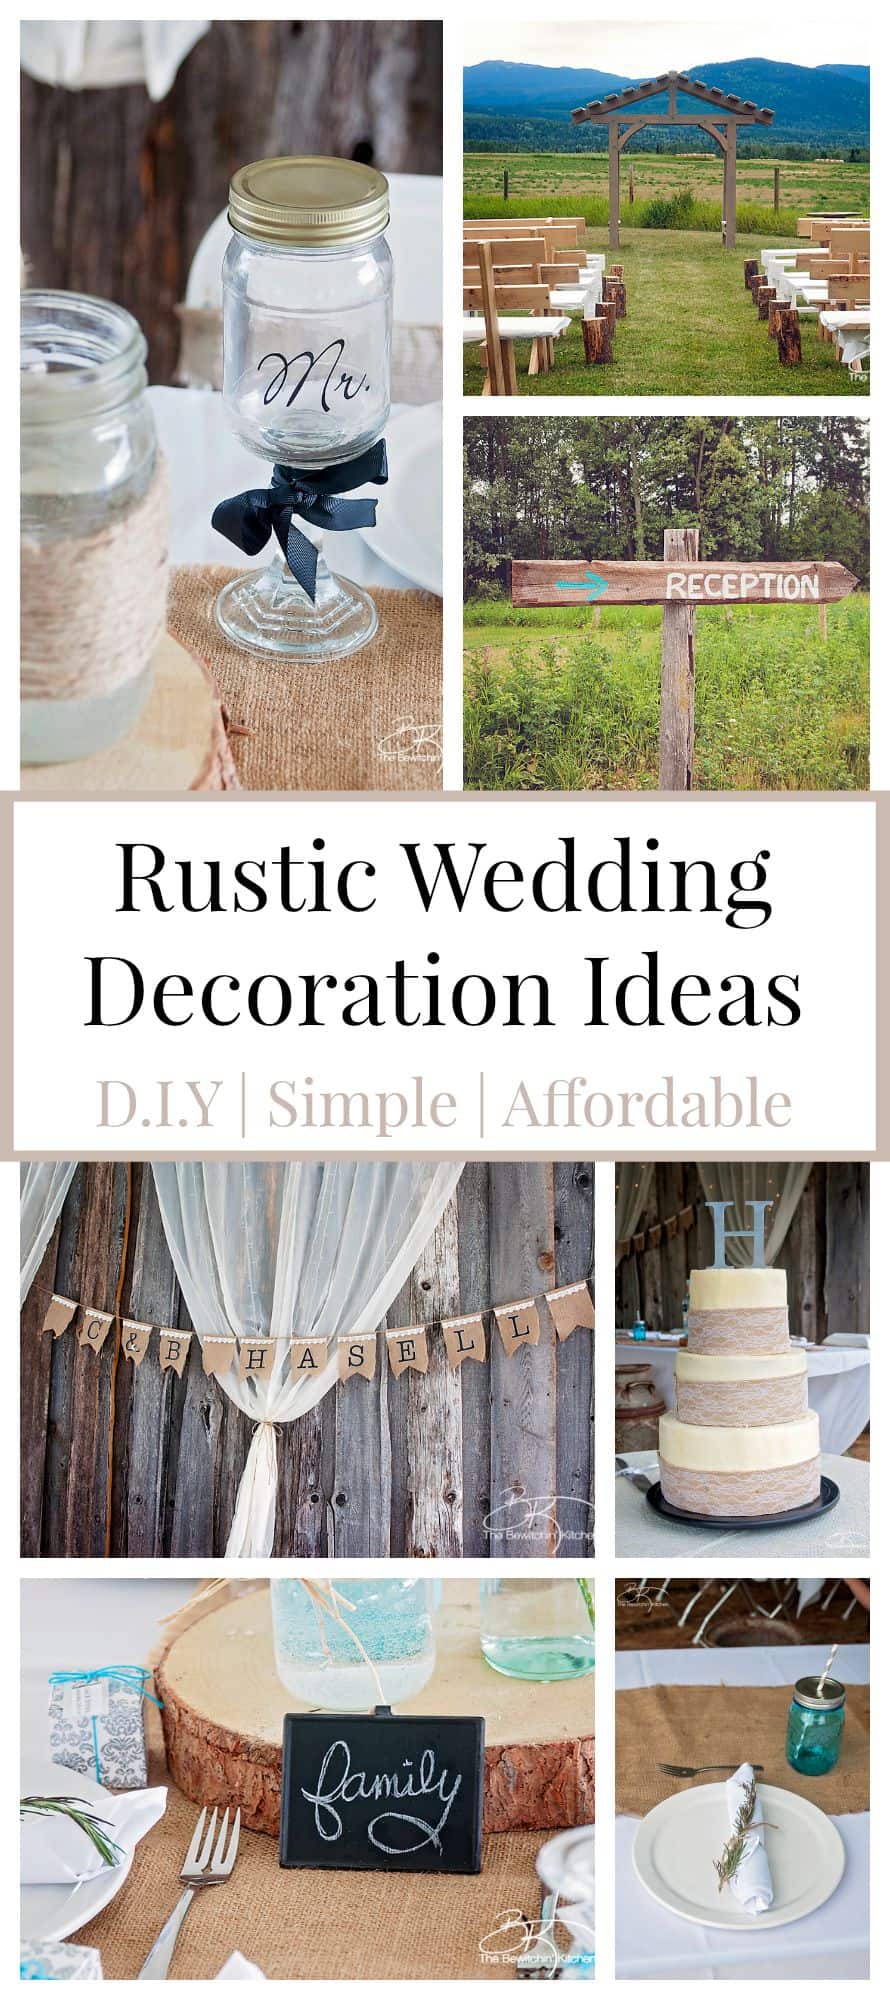 Rustic Wedding Ideas That Are DIY & Affordable